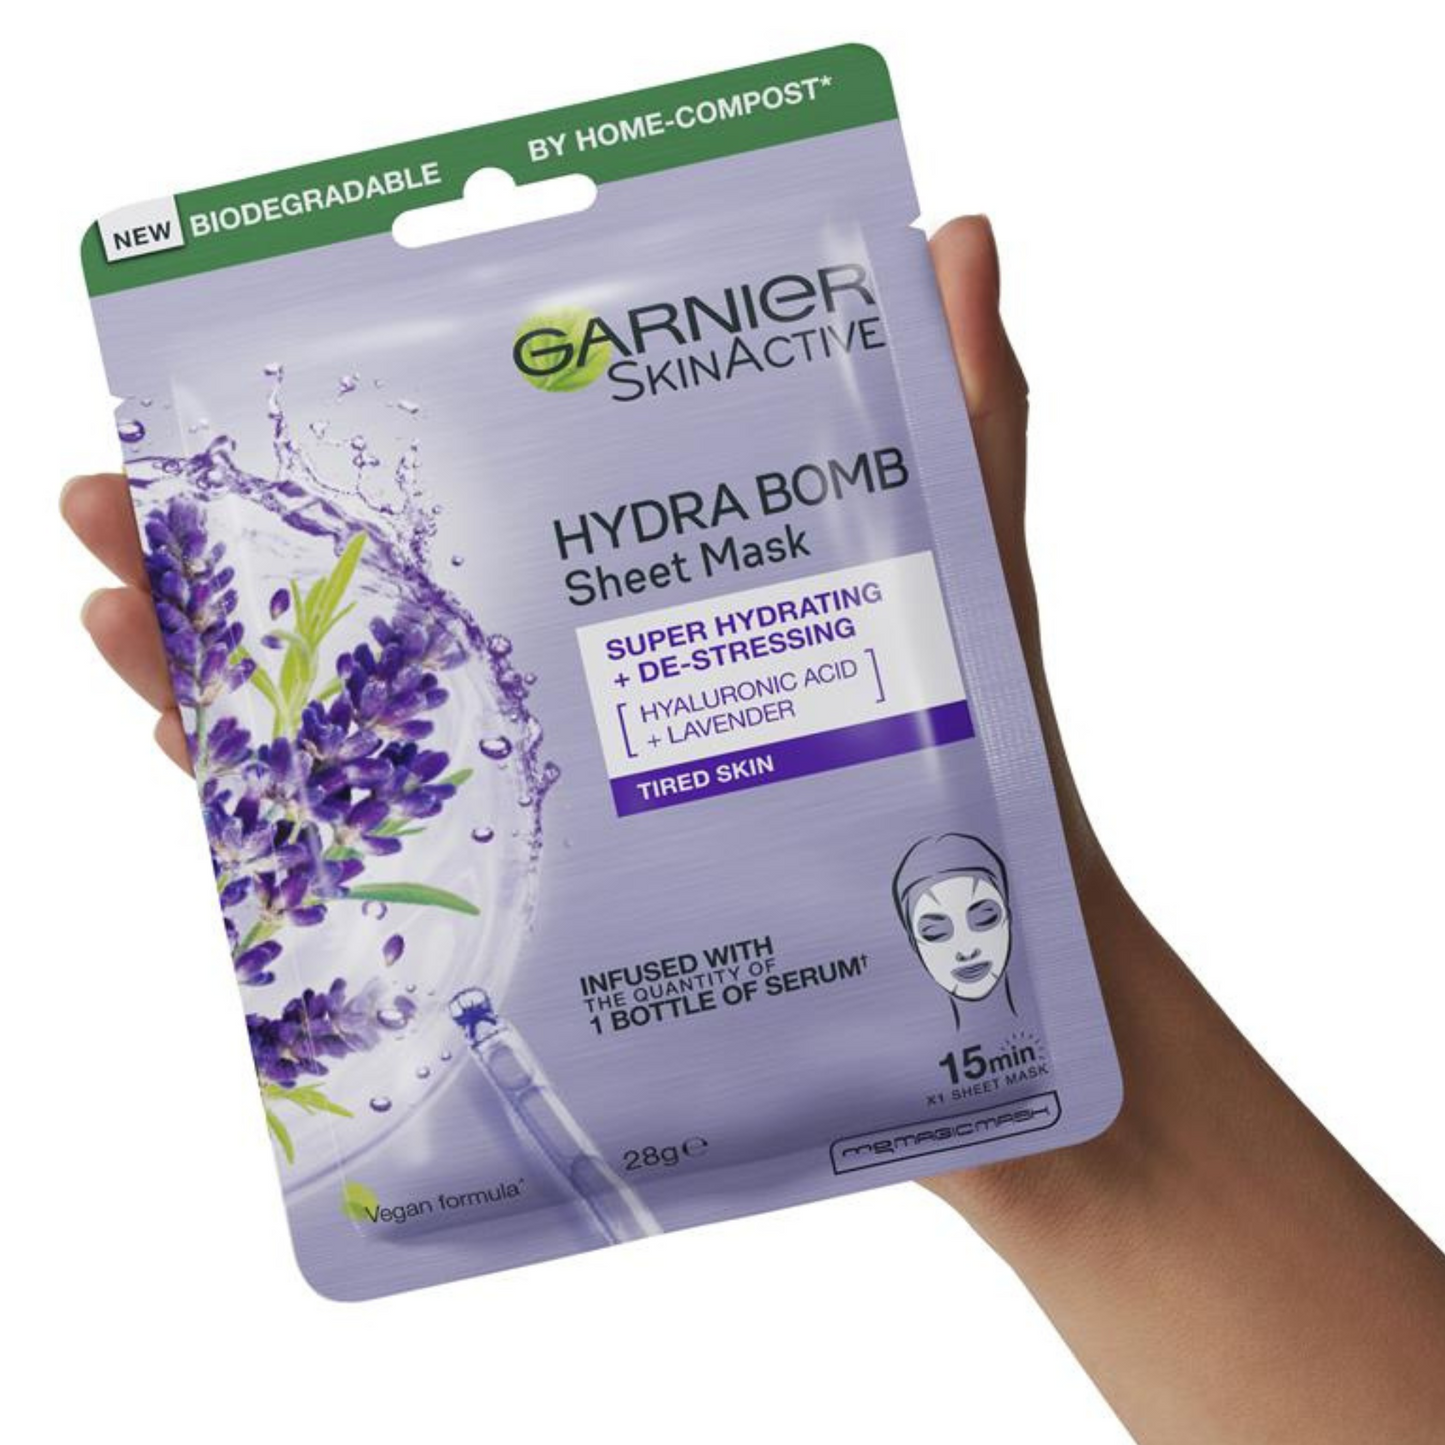 Garnier SkinActive Moisture Bomb is a super hydrating & revitalizing sheet mask. Contains Pomegranate extracts & hyaluronic acid. It leaves skin plump with moisture. Best imported foreign UK English British genuine authentic real skin care skincare beauty premium cheap price in Dhaka Chittagong Sylhet Bangladesh.